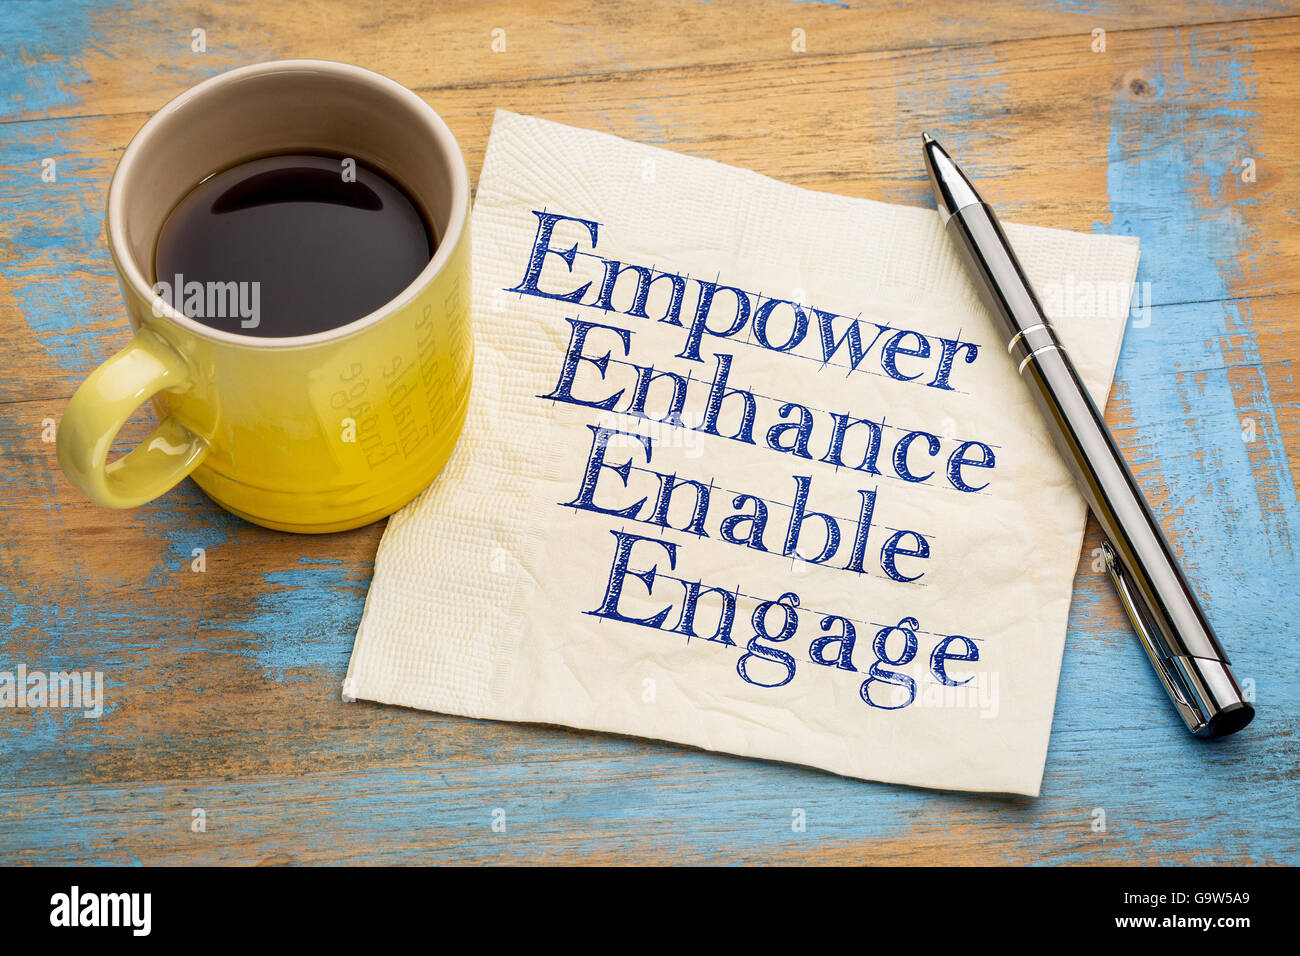 motivational leadership, coaching or business concept - empower, enhance, enable and engage  words on a napkin Stock Photo